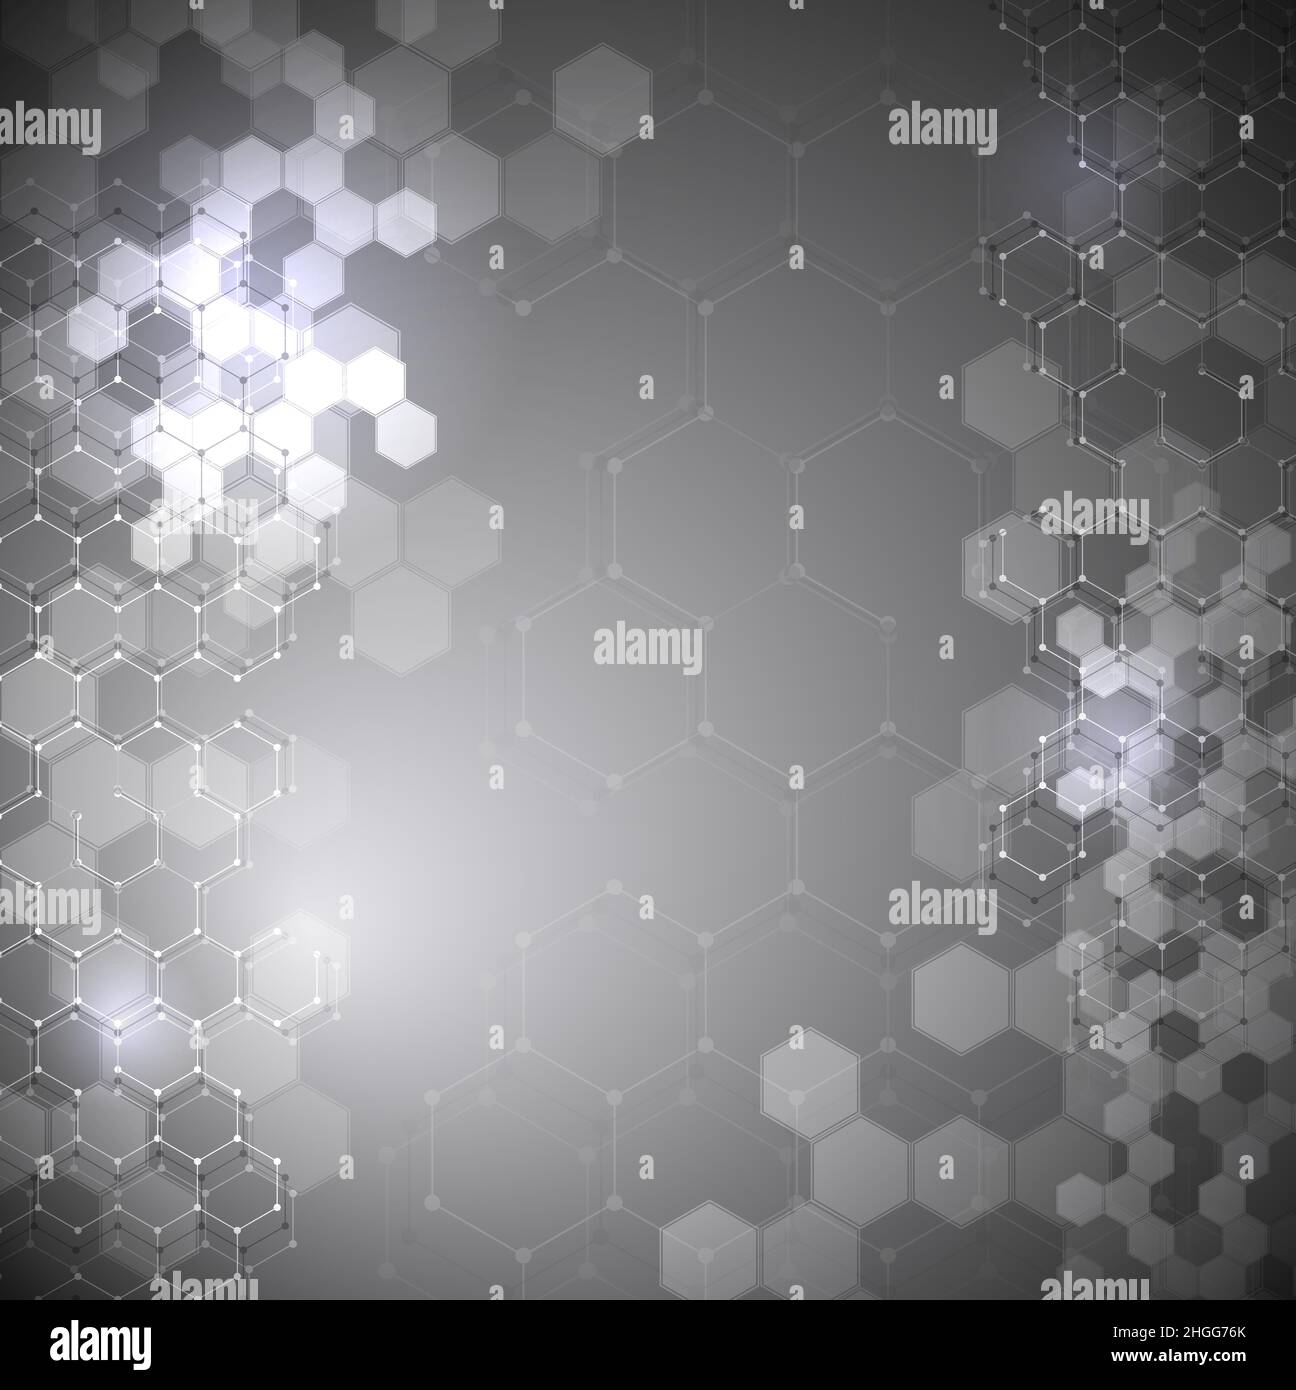 EPS 10 vector abstract science and futuristic hexagonal technology concept background. Digital image with silver light effects and blurs over darker b Stock Vector